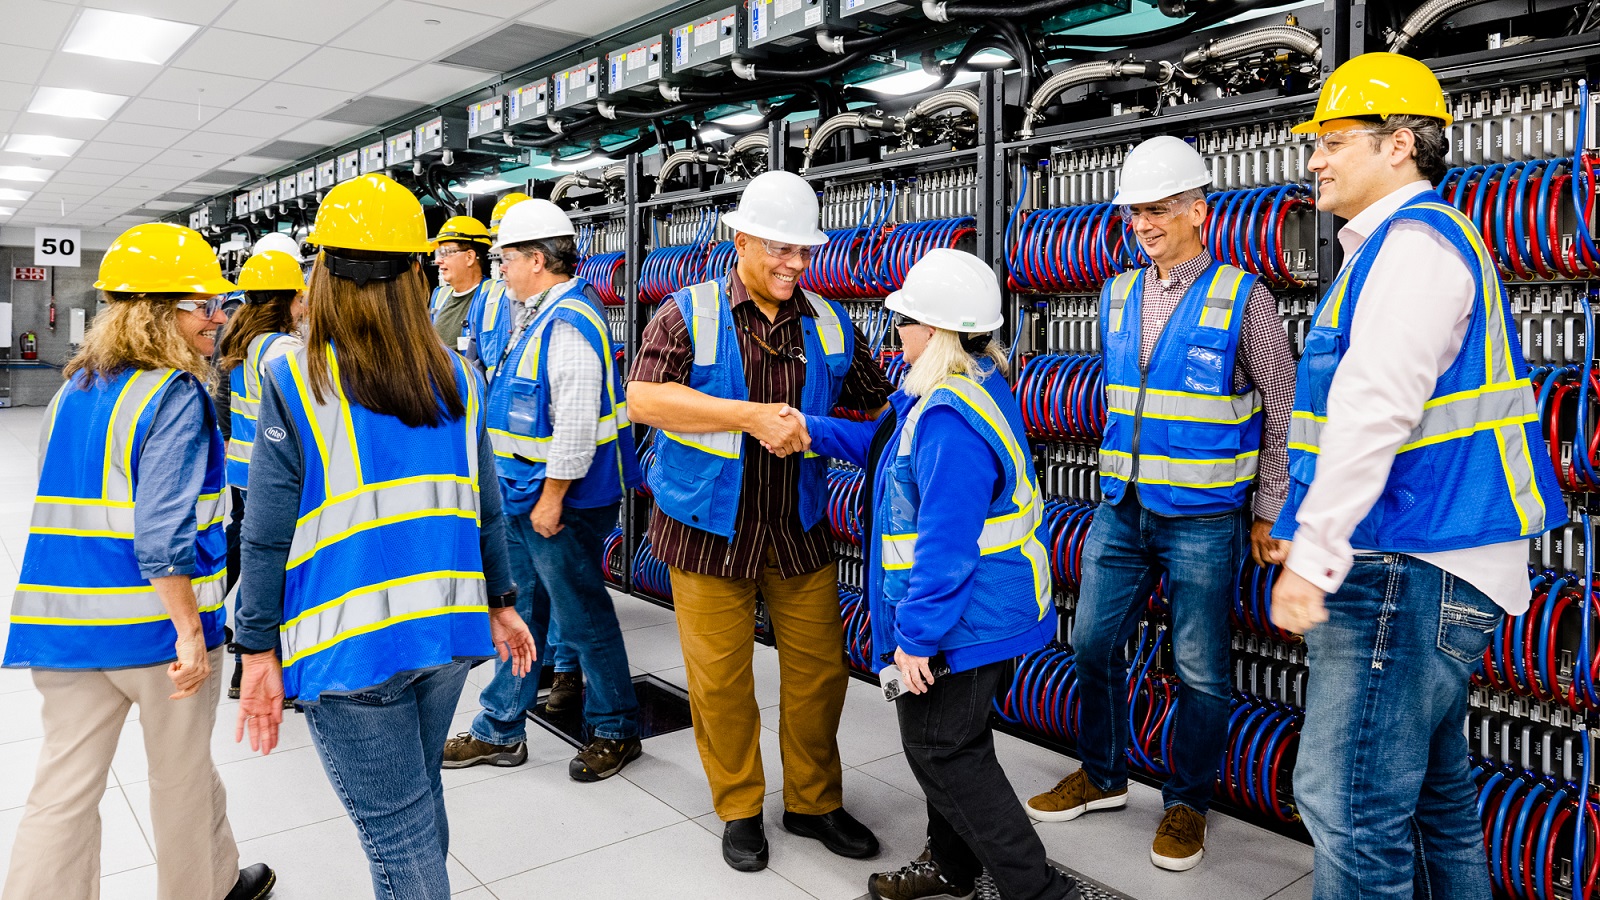 Technicians gathered in front of supercomputer. (Image by Argonne National Laboratory.)